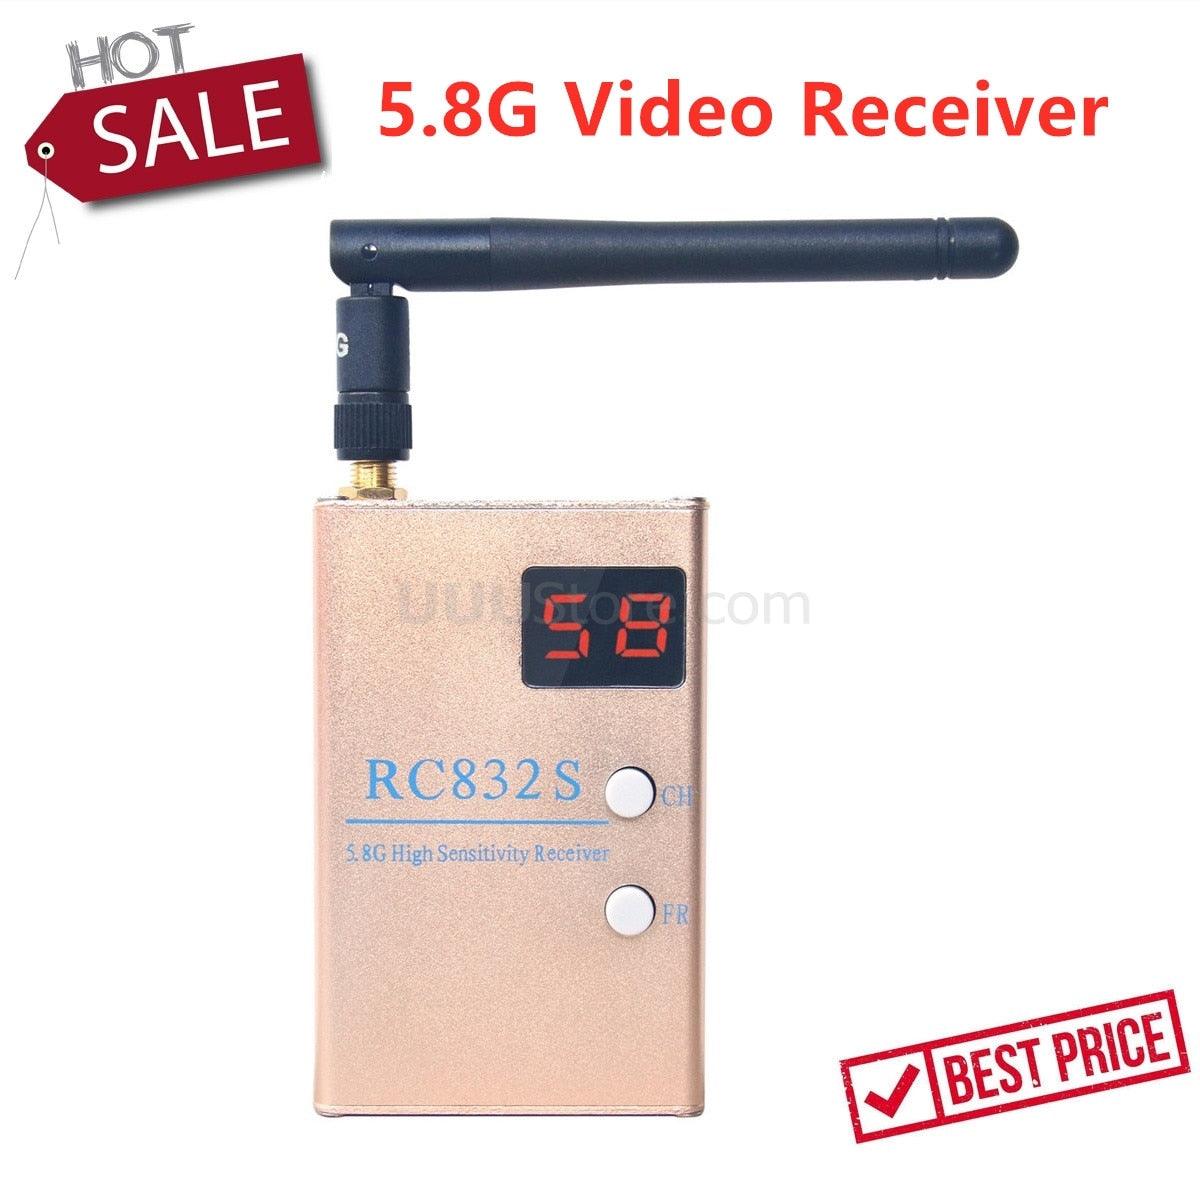 RC832S Receiver - FPV 5.8G 5.8GHz 48 Channels Video Receiver With A/V and Power Cables Same As RC832 RC832H For FPV Racing Drone - RCDrone